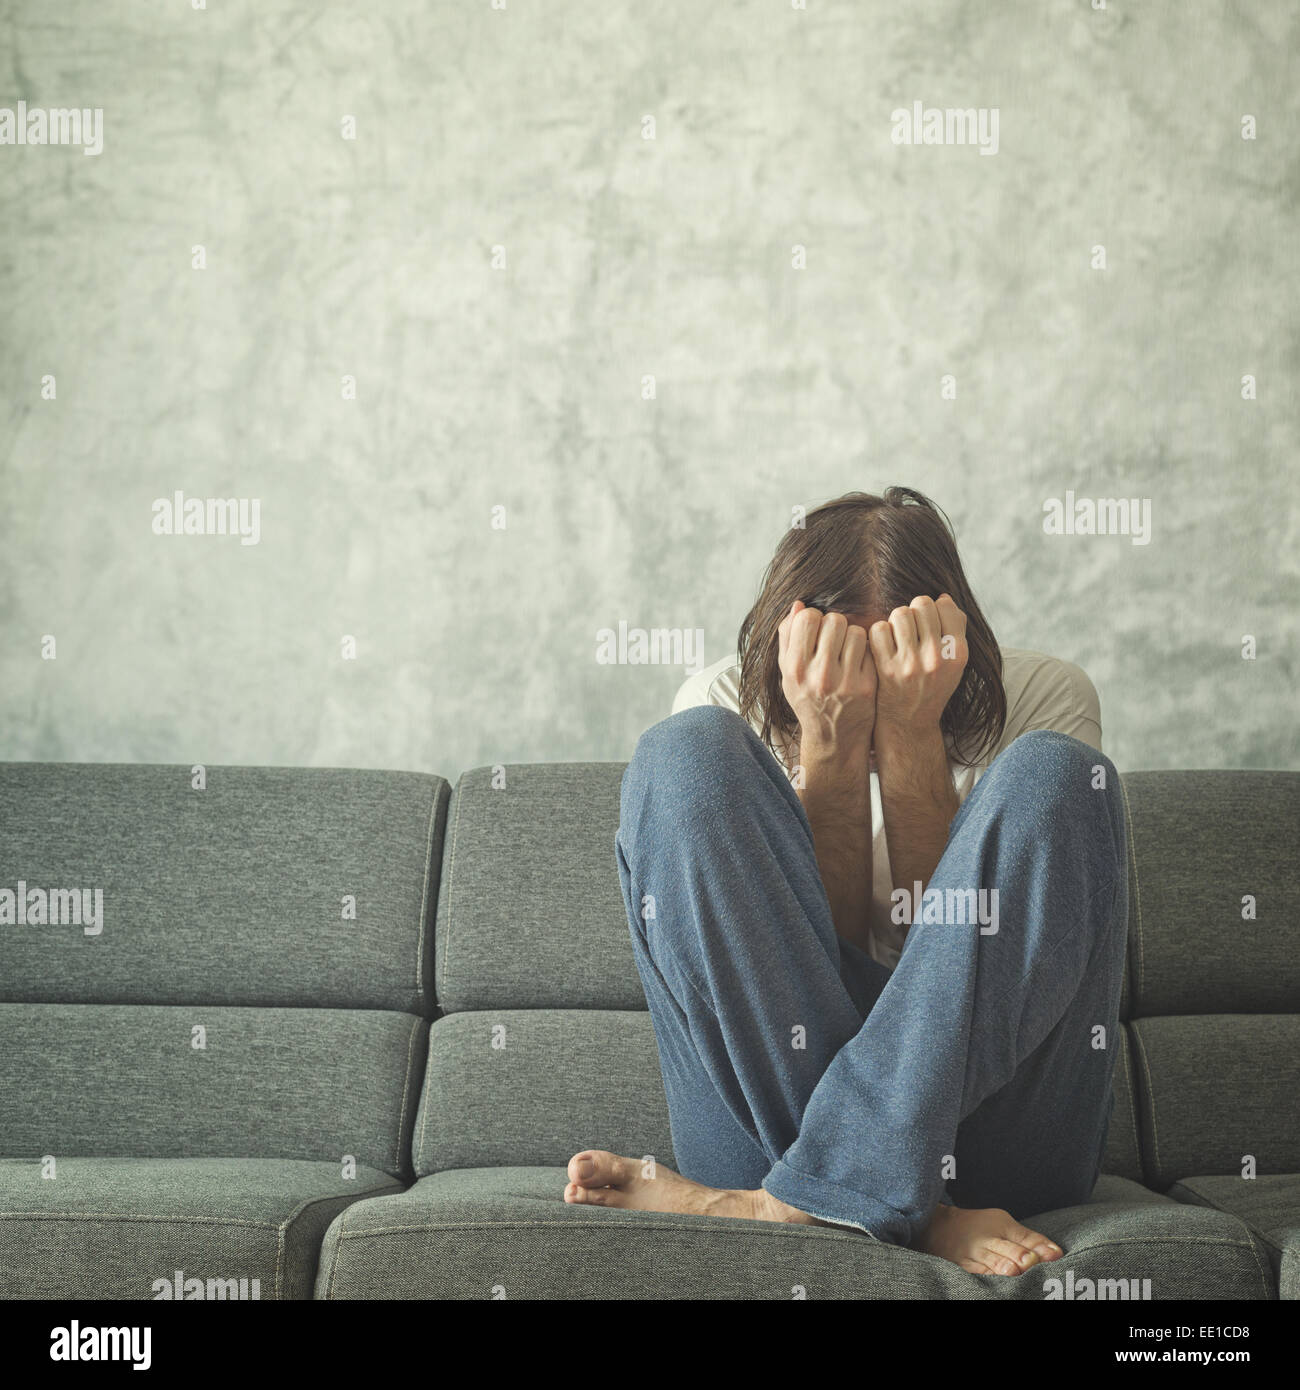 Depressed and sad man on the couch in the room, covering face and crying in despair. Stock Photo